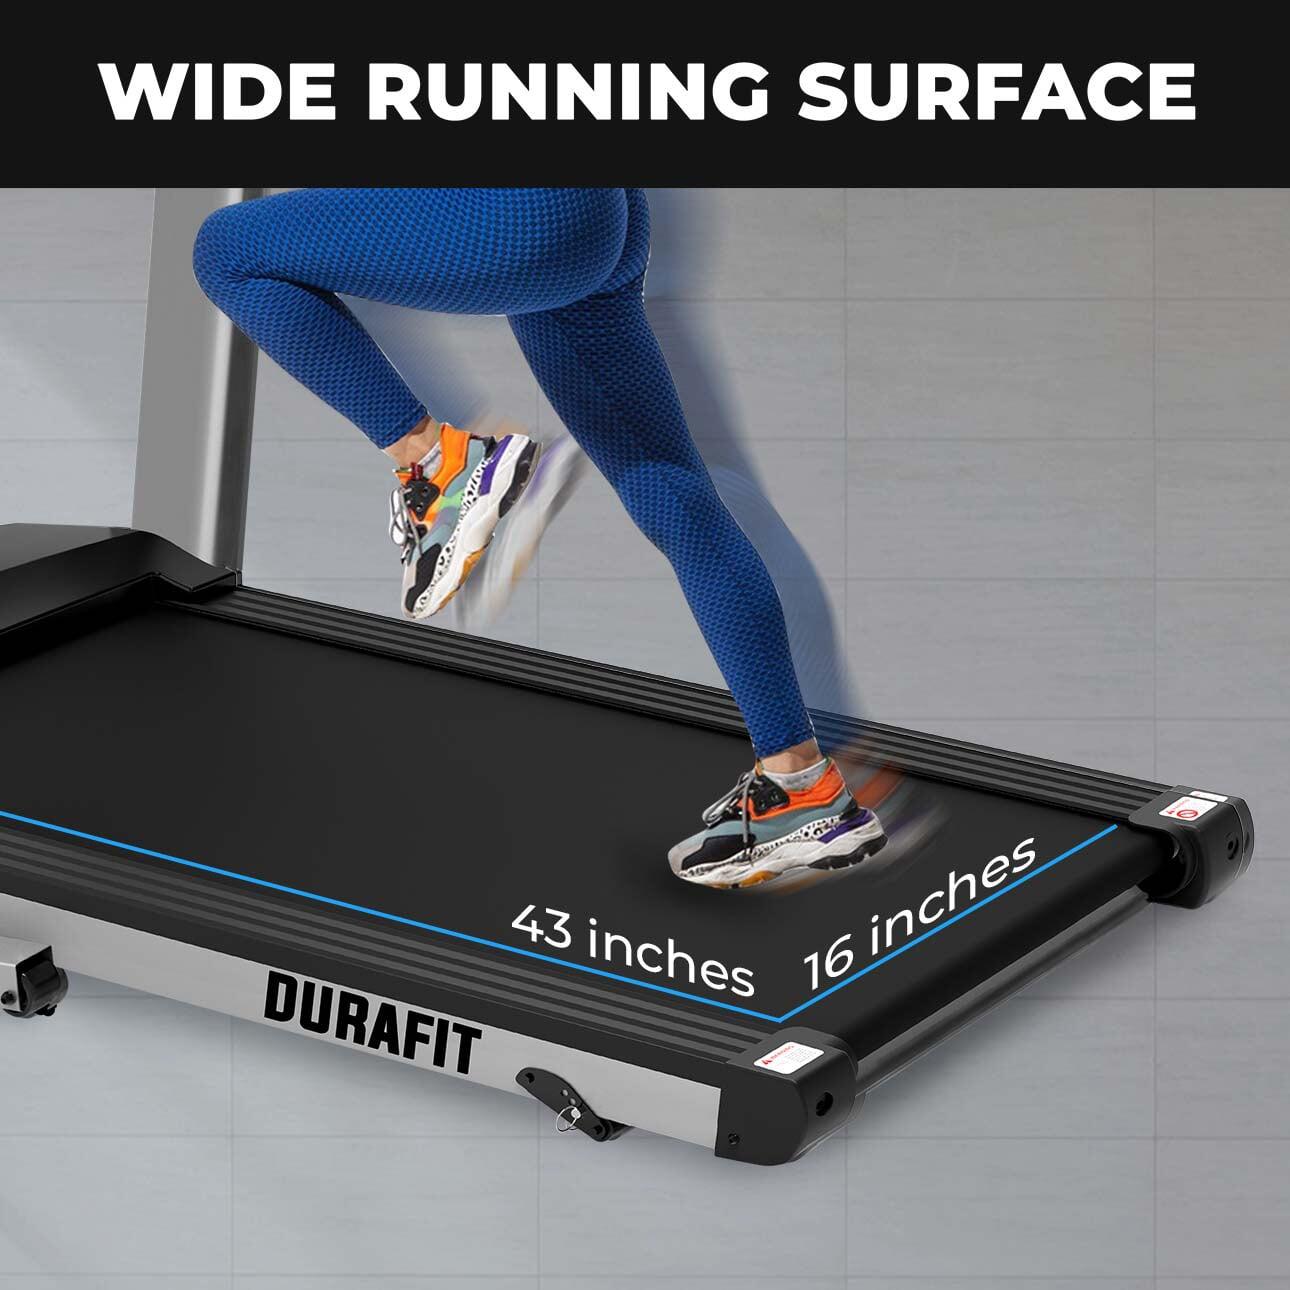 Durafit Strong Multifunction Treadmill with Wide Running Surface